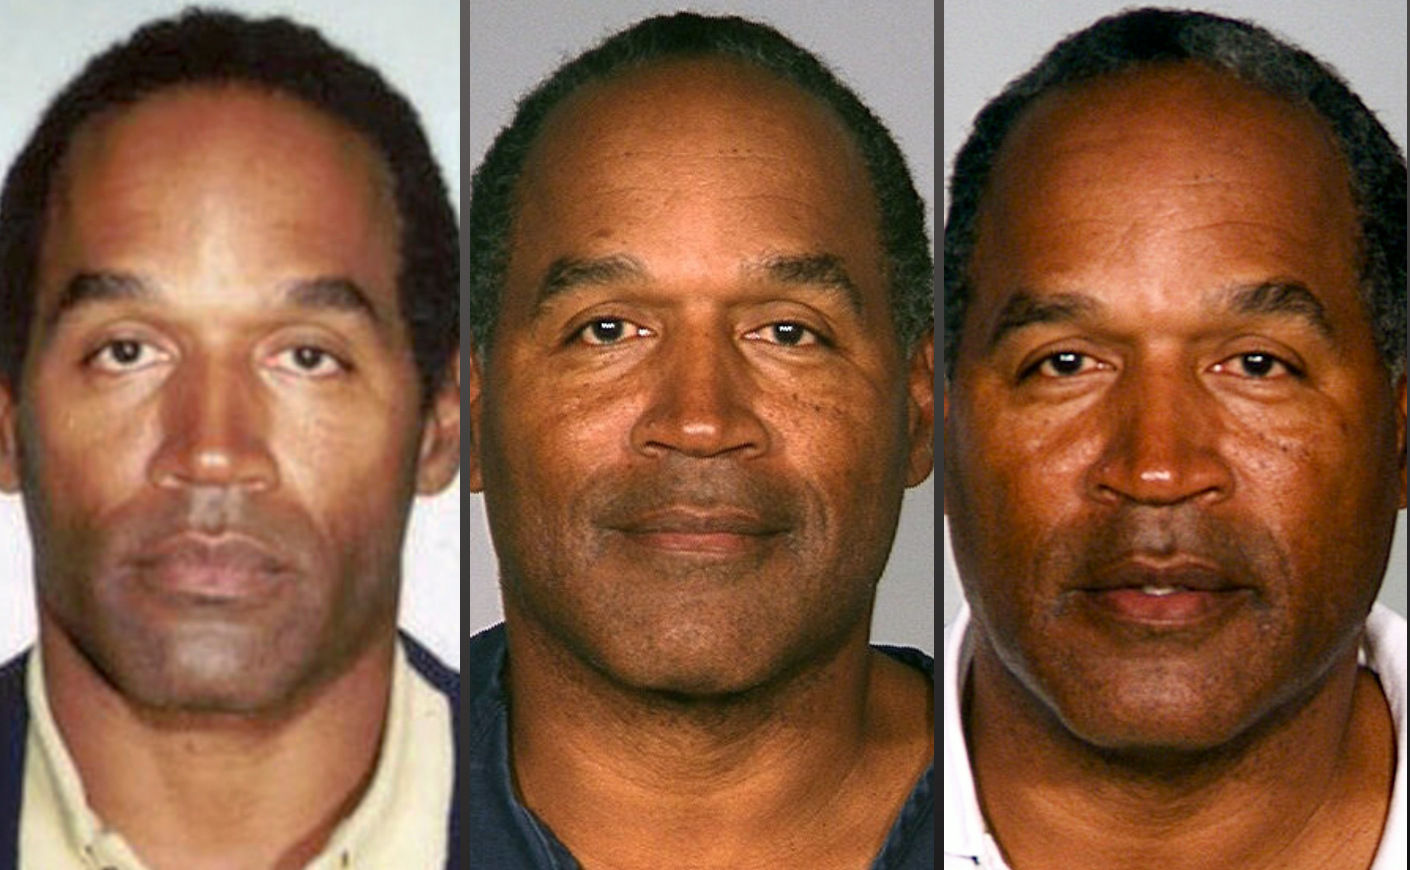 O.J. Simpson mugshots from 1994, 2007, and 2008